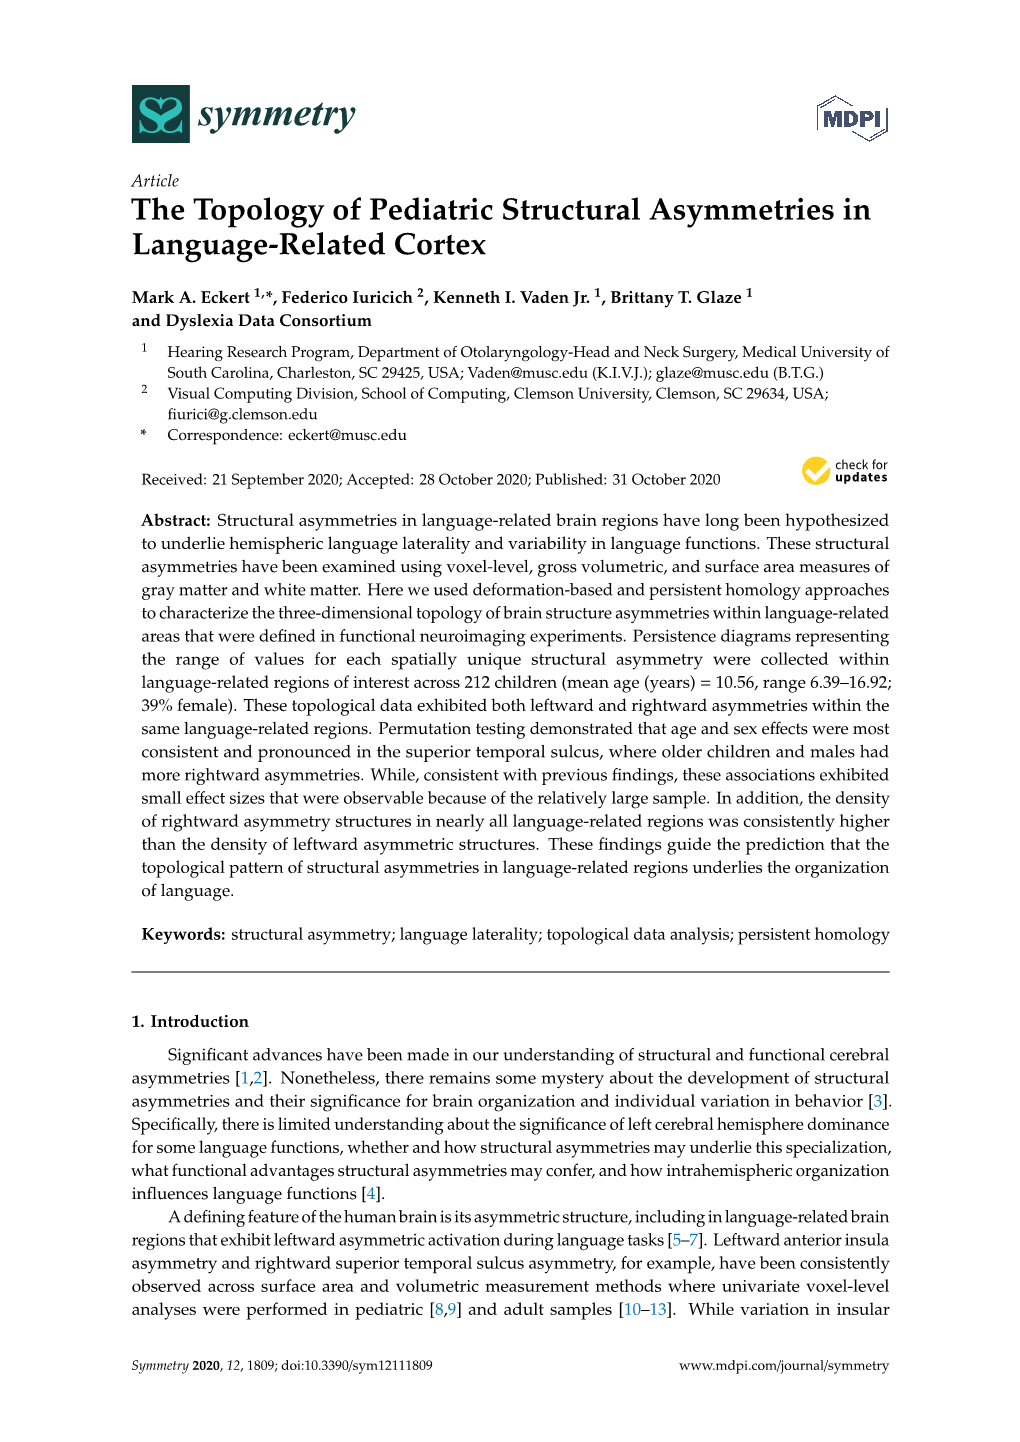 The Topology of Pediatric Structural Asymmetries in Language-Related Cortex